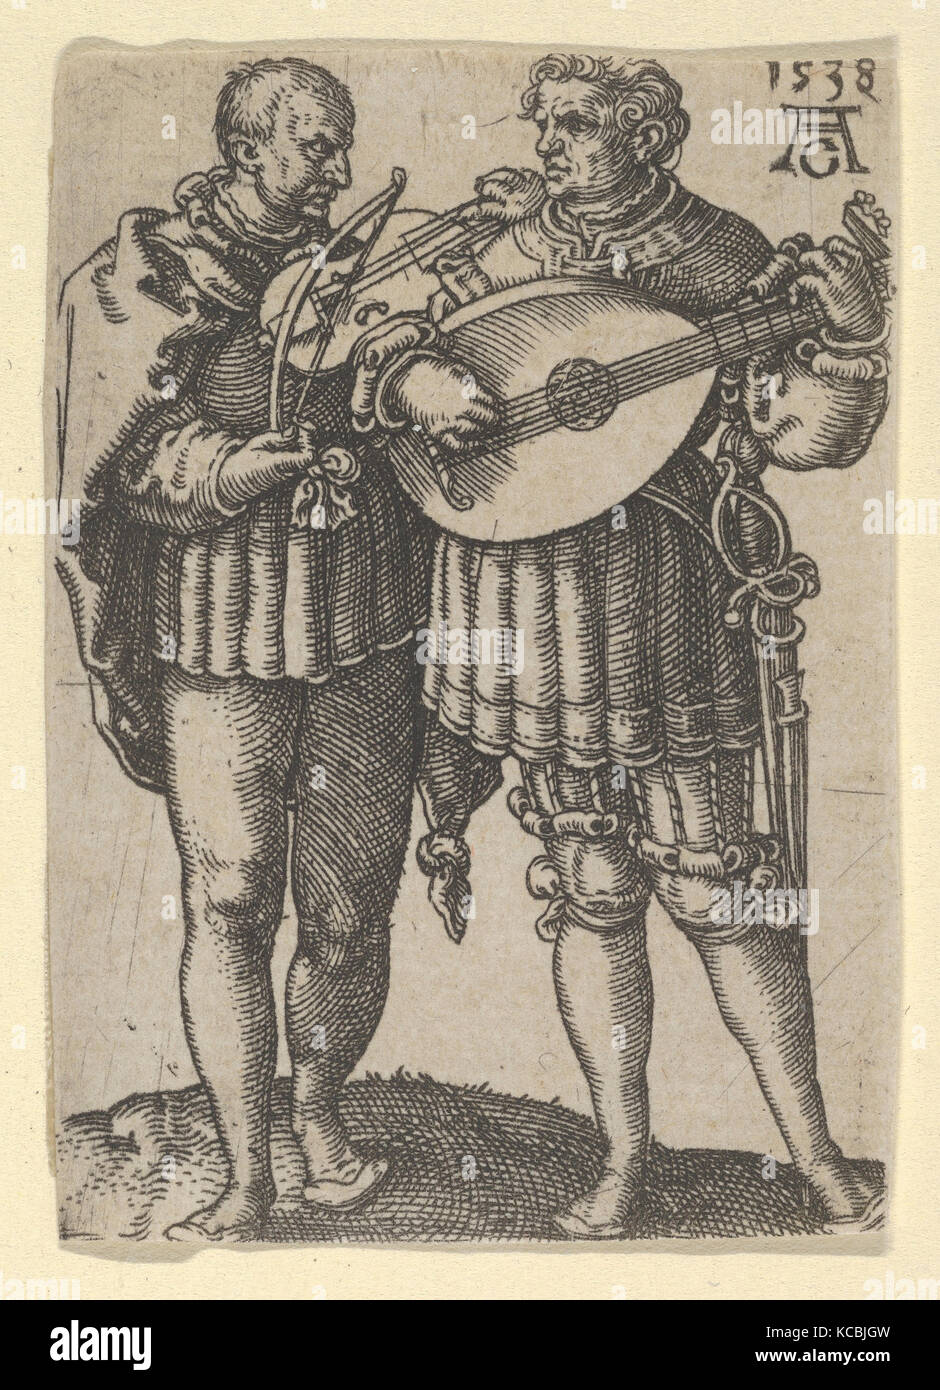 Two Musicians Playing the Violin and the Lute, from The Small Wedding Dancers, Heinrich Aldegrever, 1538 Stock Photo